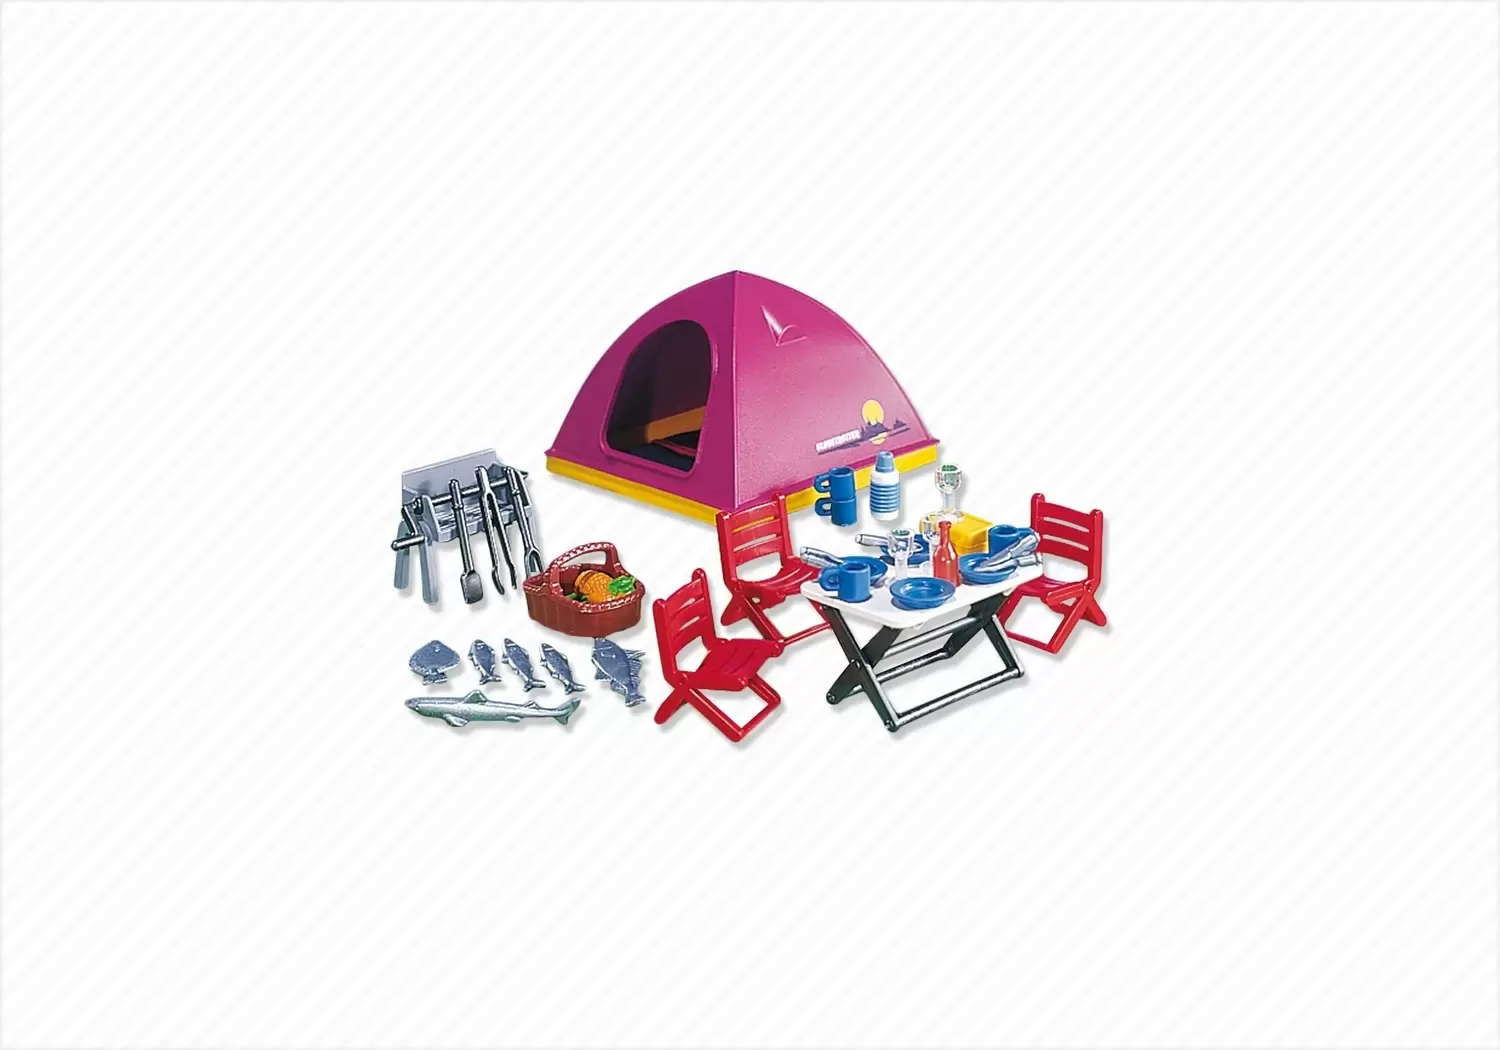 Playmobil on Hollidays - Tent and Camping Equipment